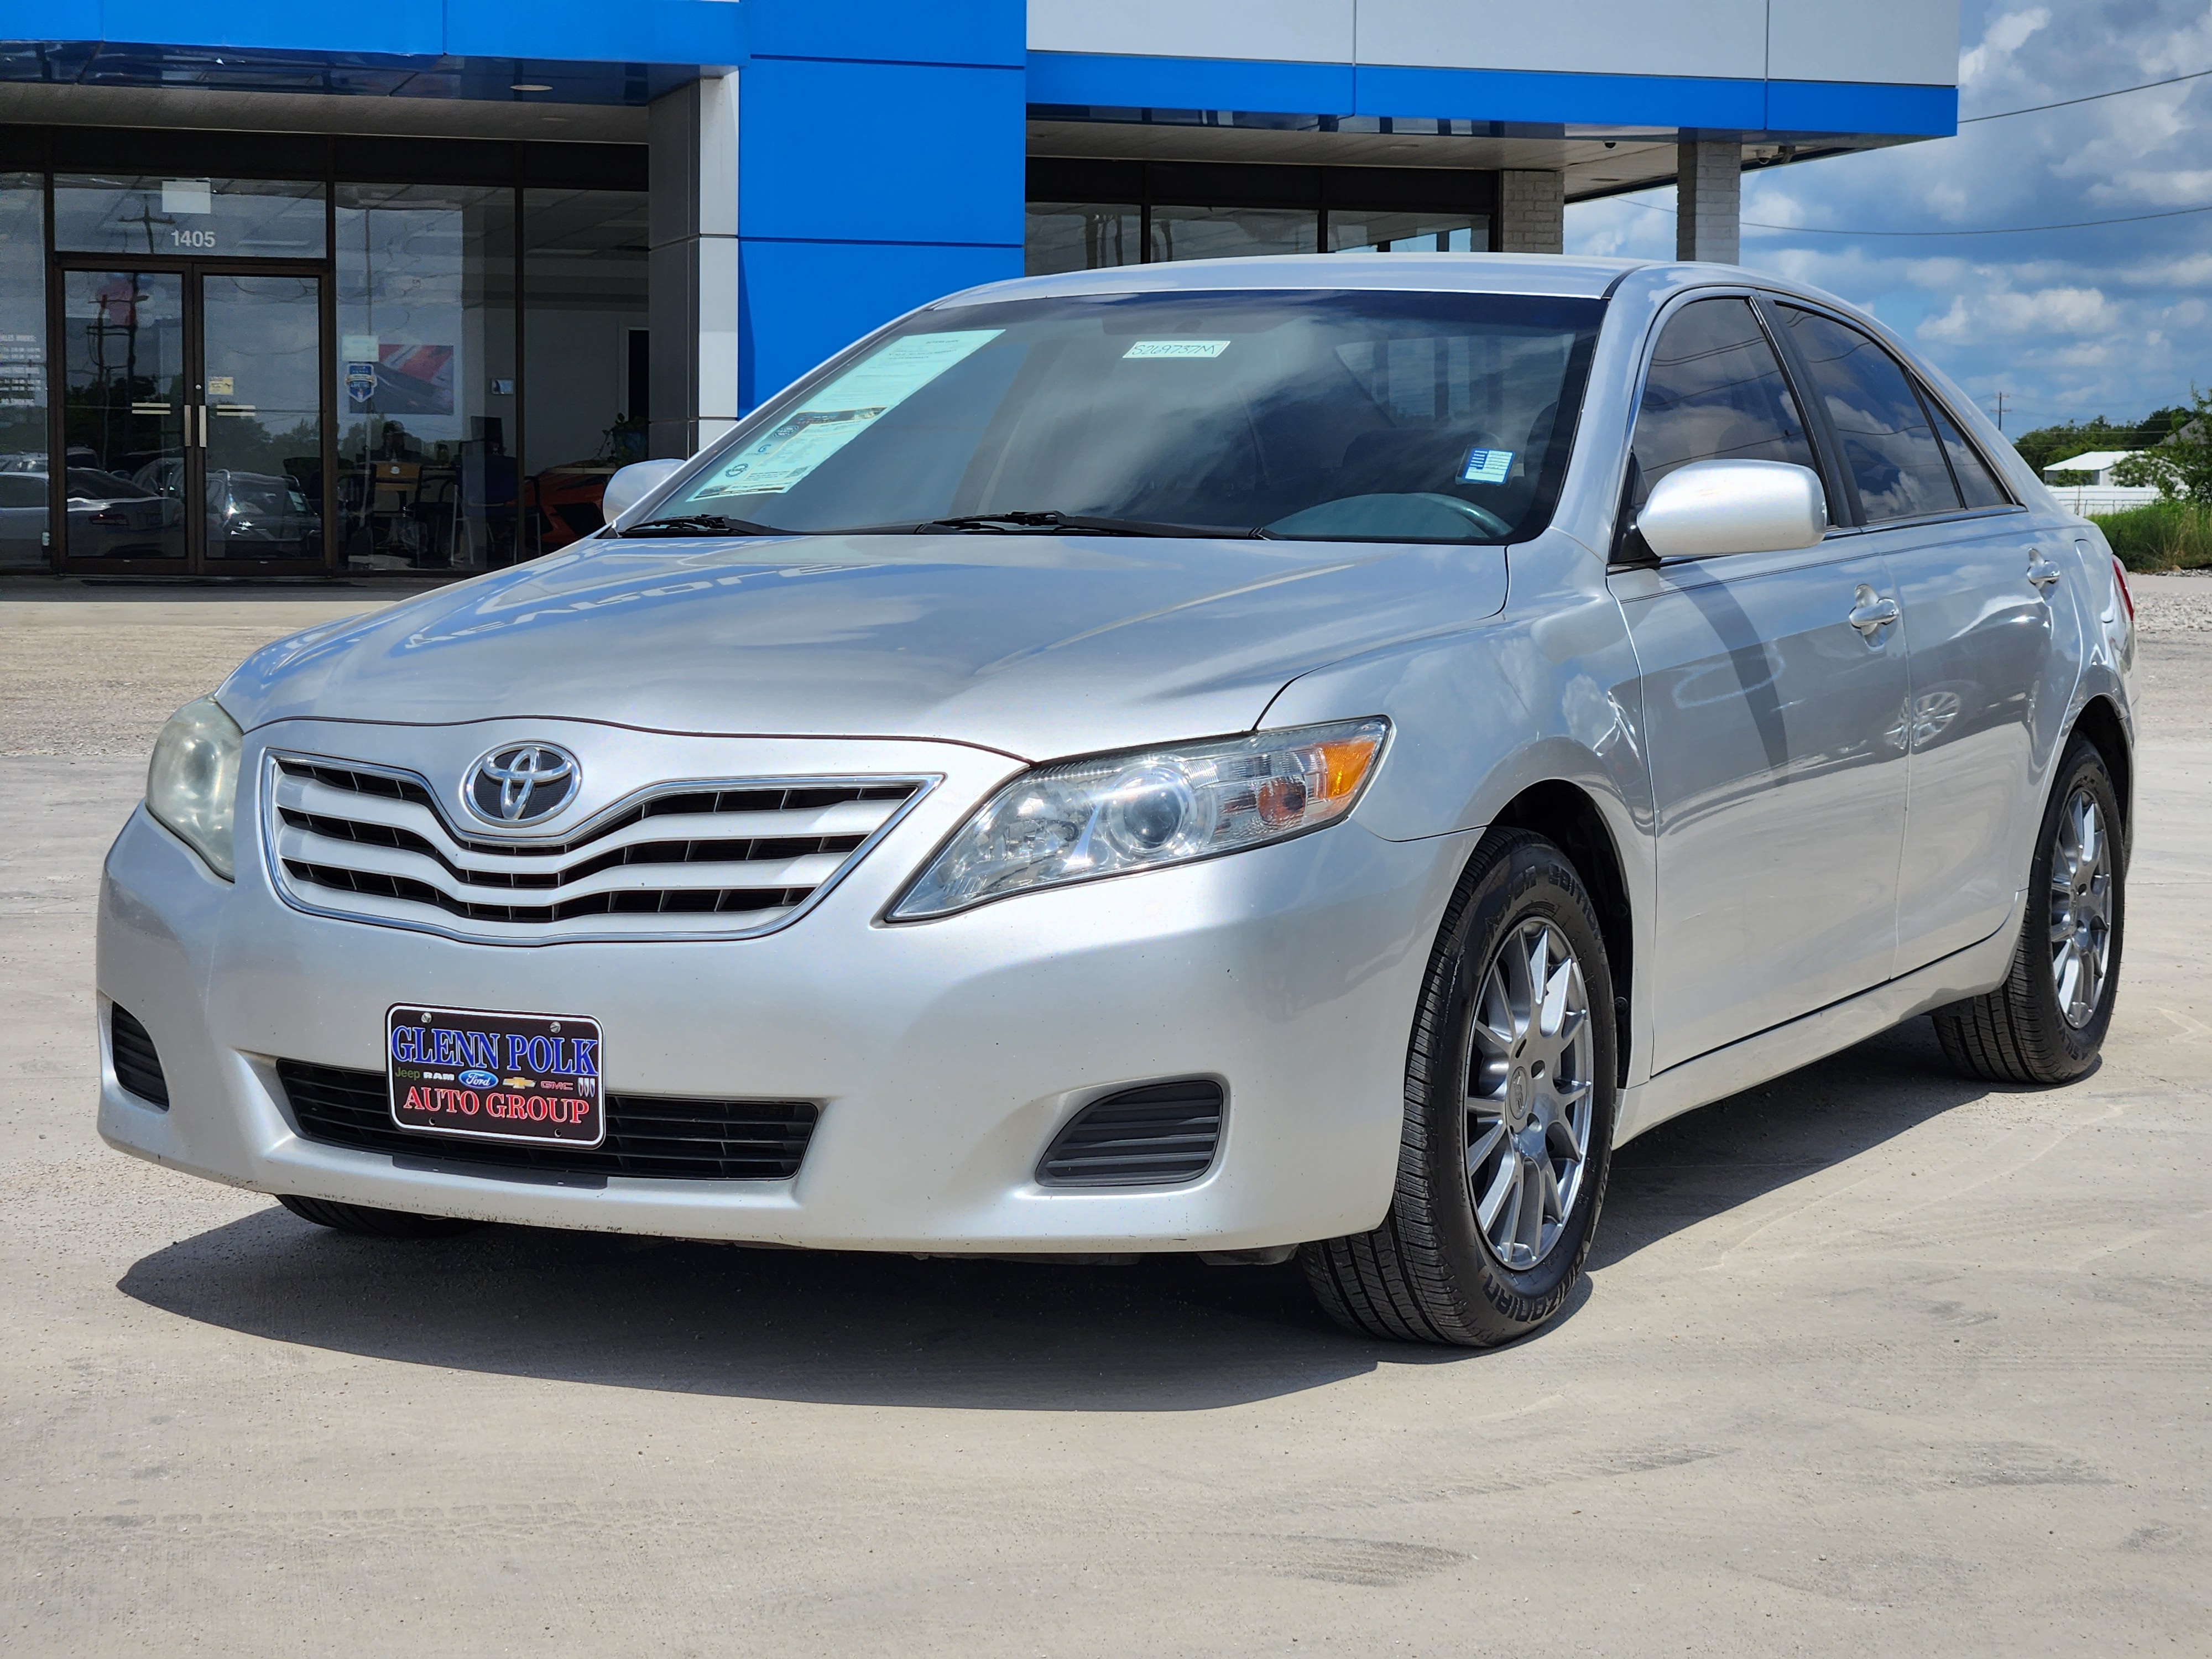 2010 Toyota Camry LE 4